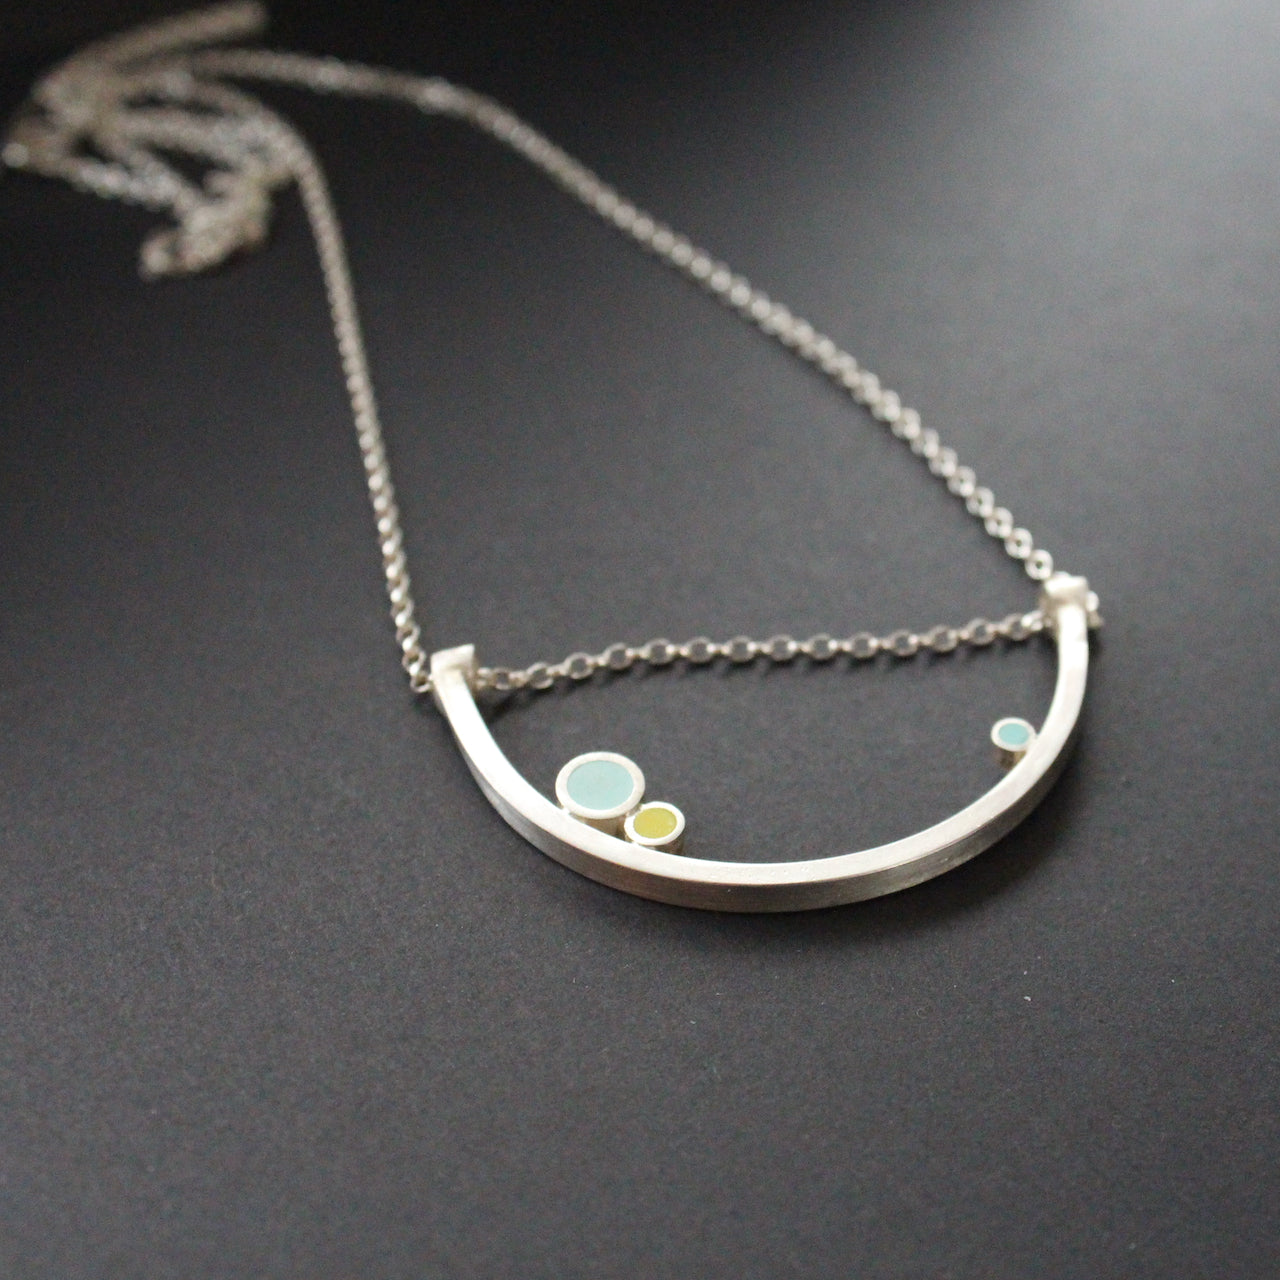 Curved necklace with 3 dots of turquoise, yellow, aqua sitting on curve by artist Clare Lloyd.